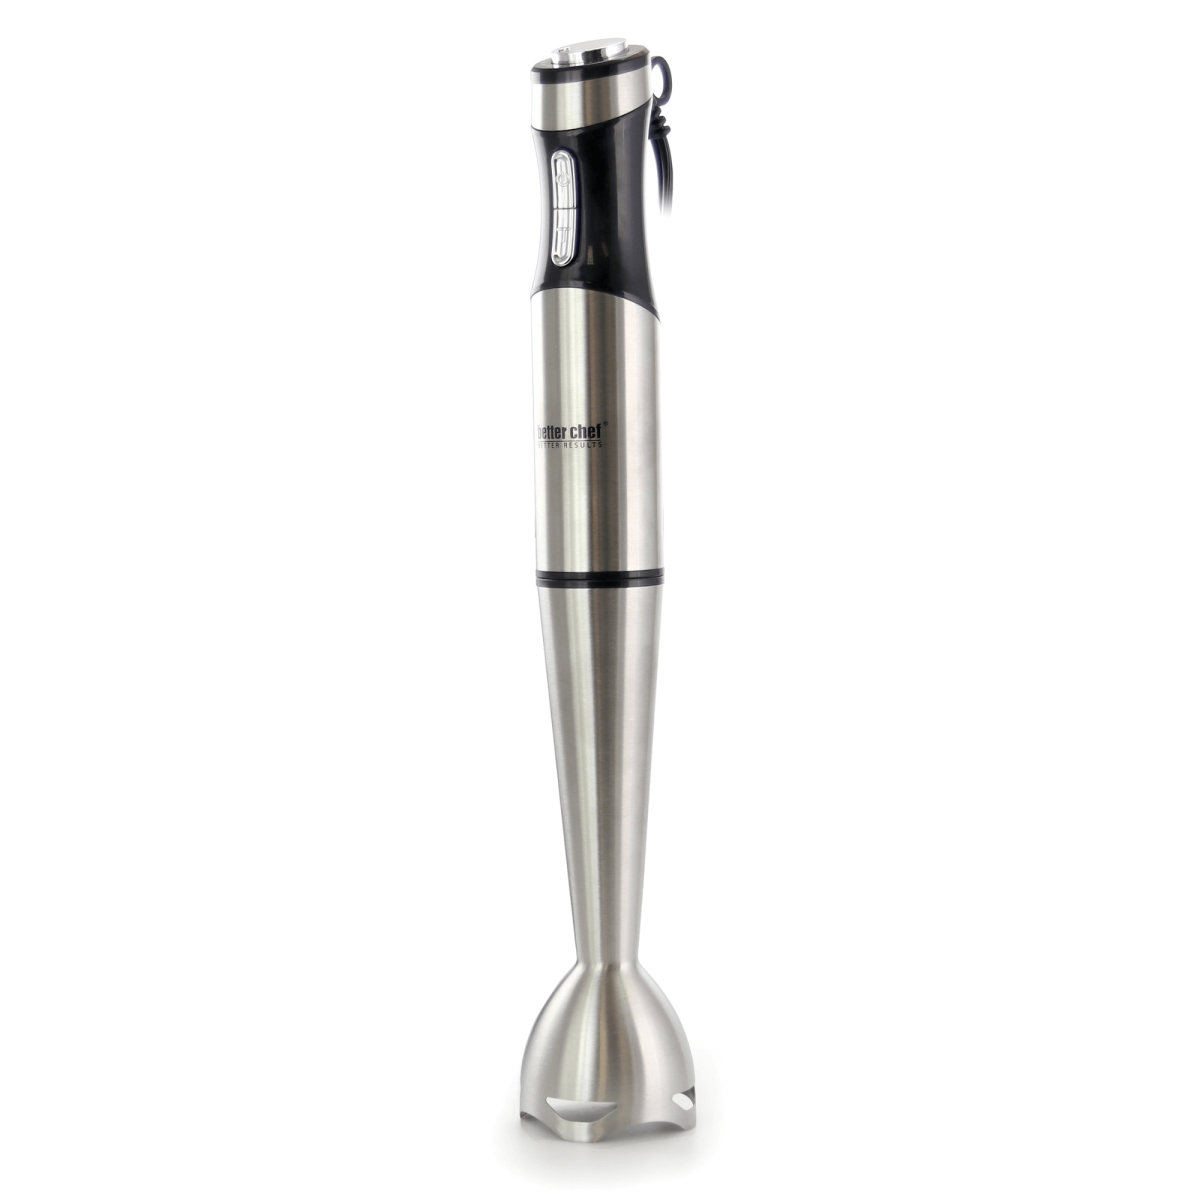 Picture of Better Chef IM-804S-CP Better Chef 260W Variable Speed Stainless Steel Immersion Blender with Cup